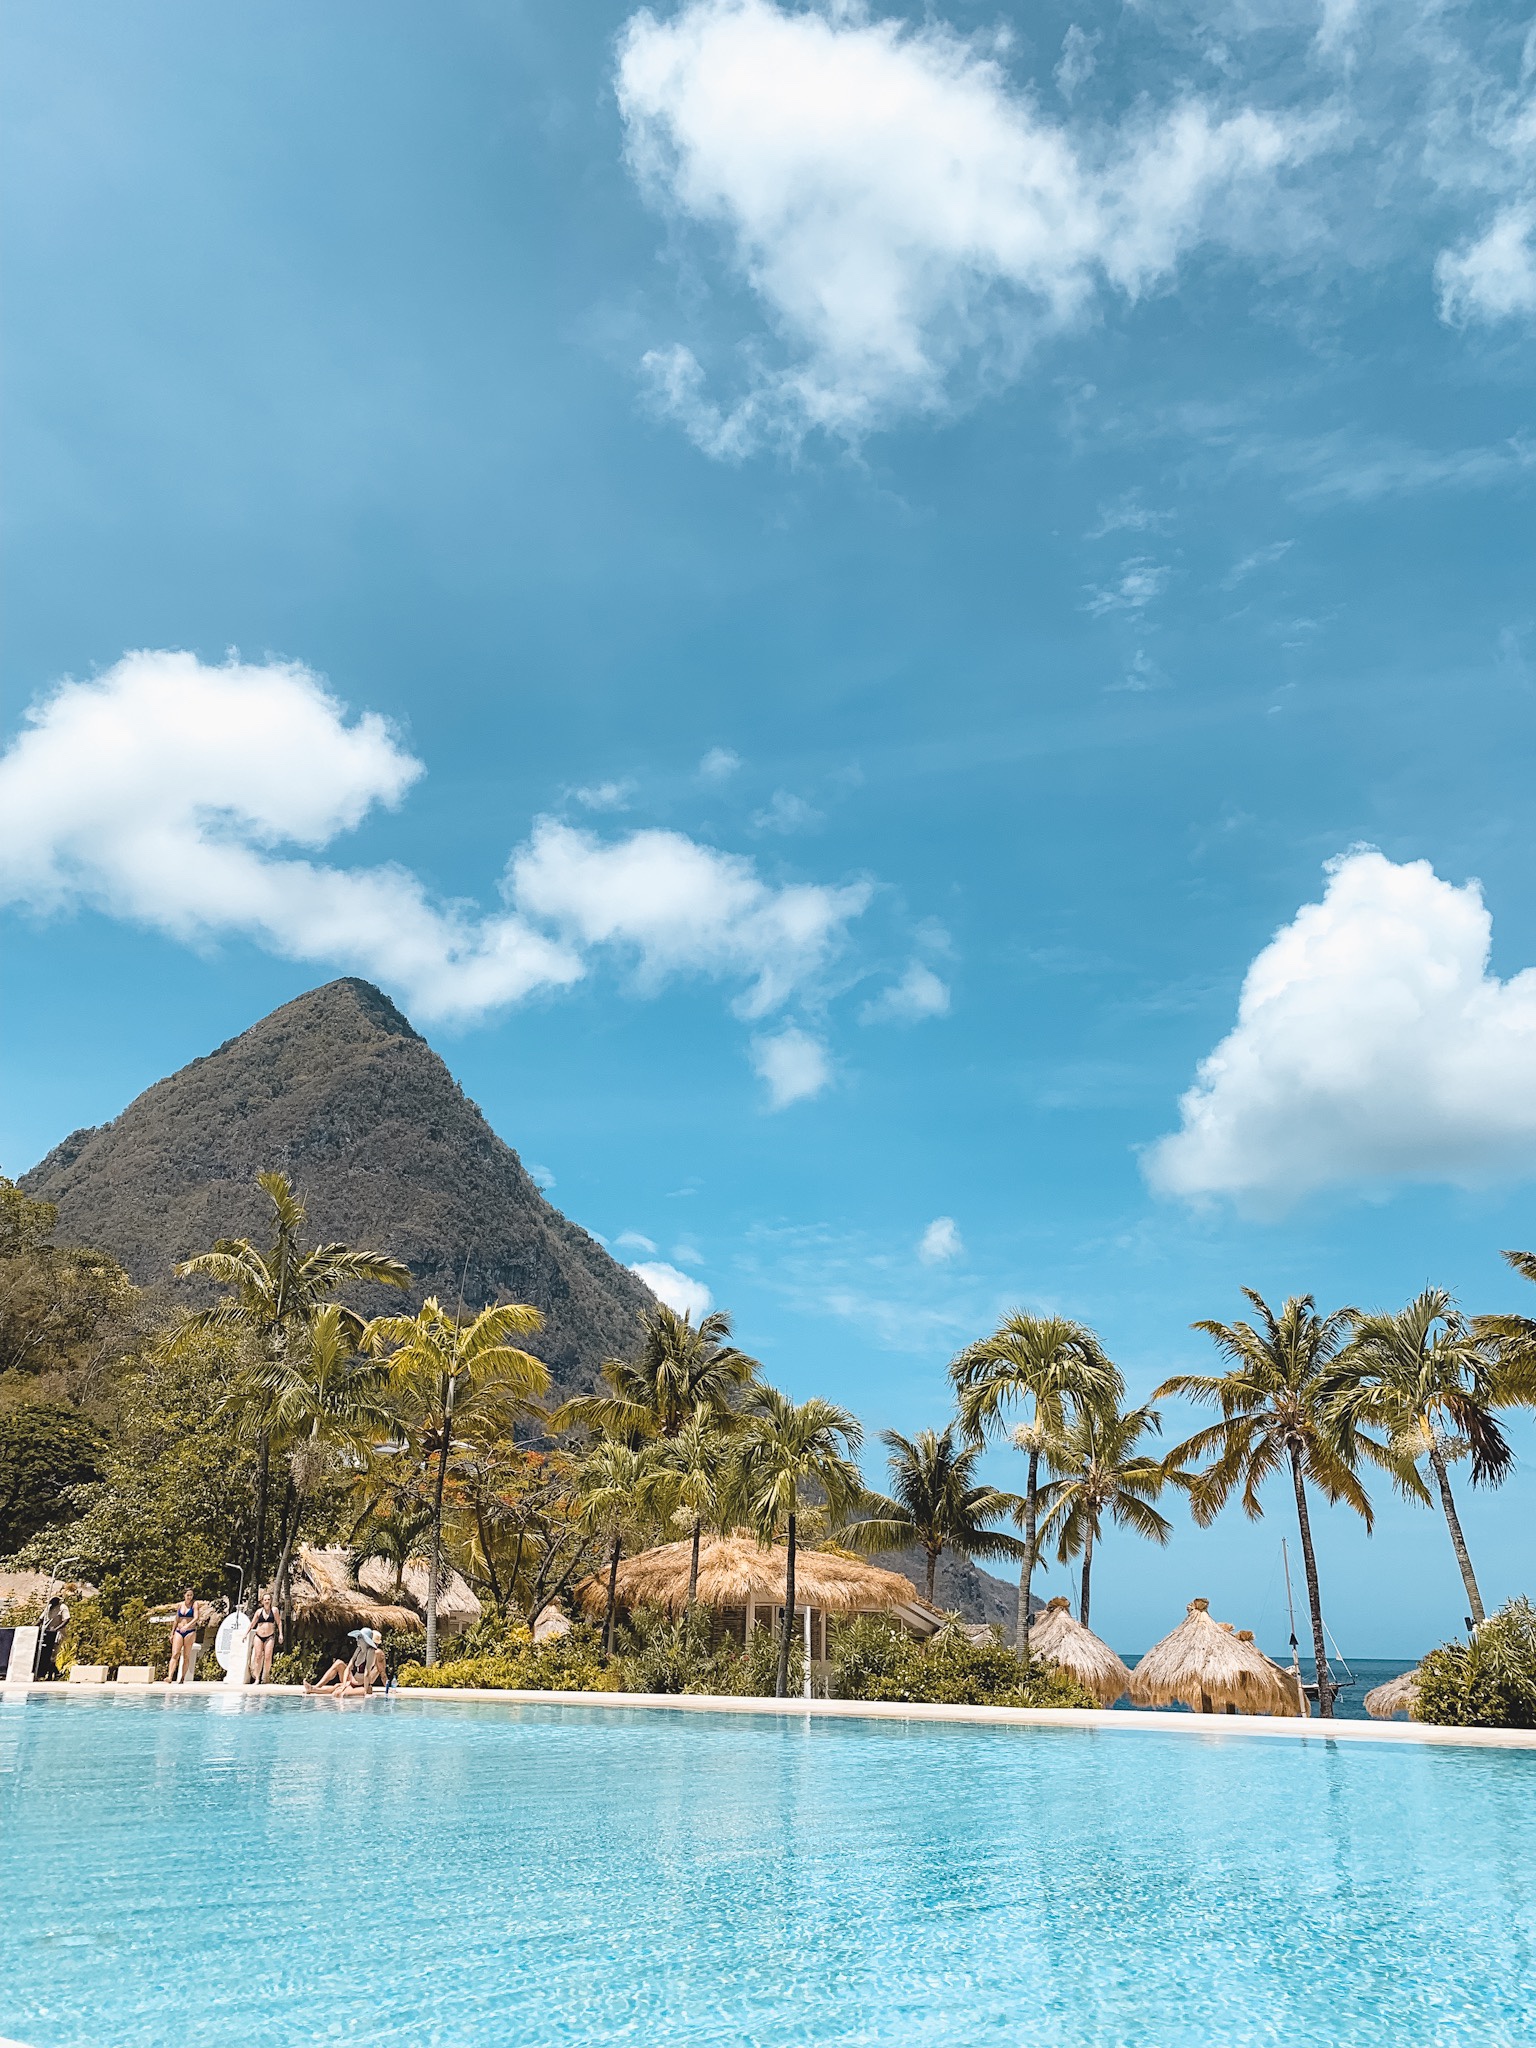 It's not called Hawaii of the east for nothing. Sharing my full hotel review for Sugar Beach in St. Lucia on the blog